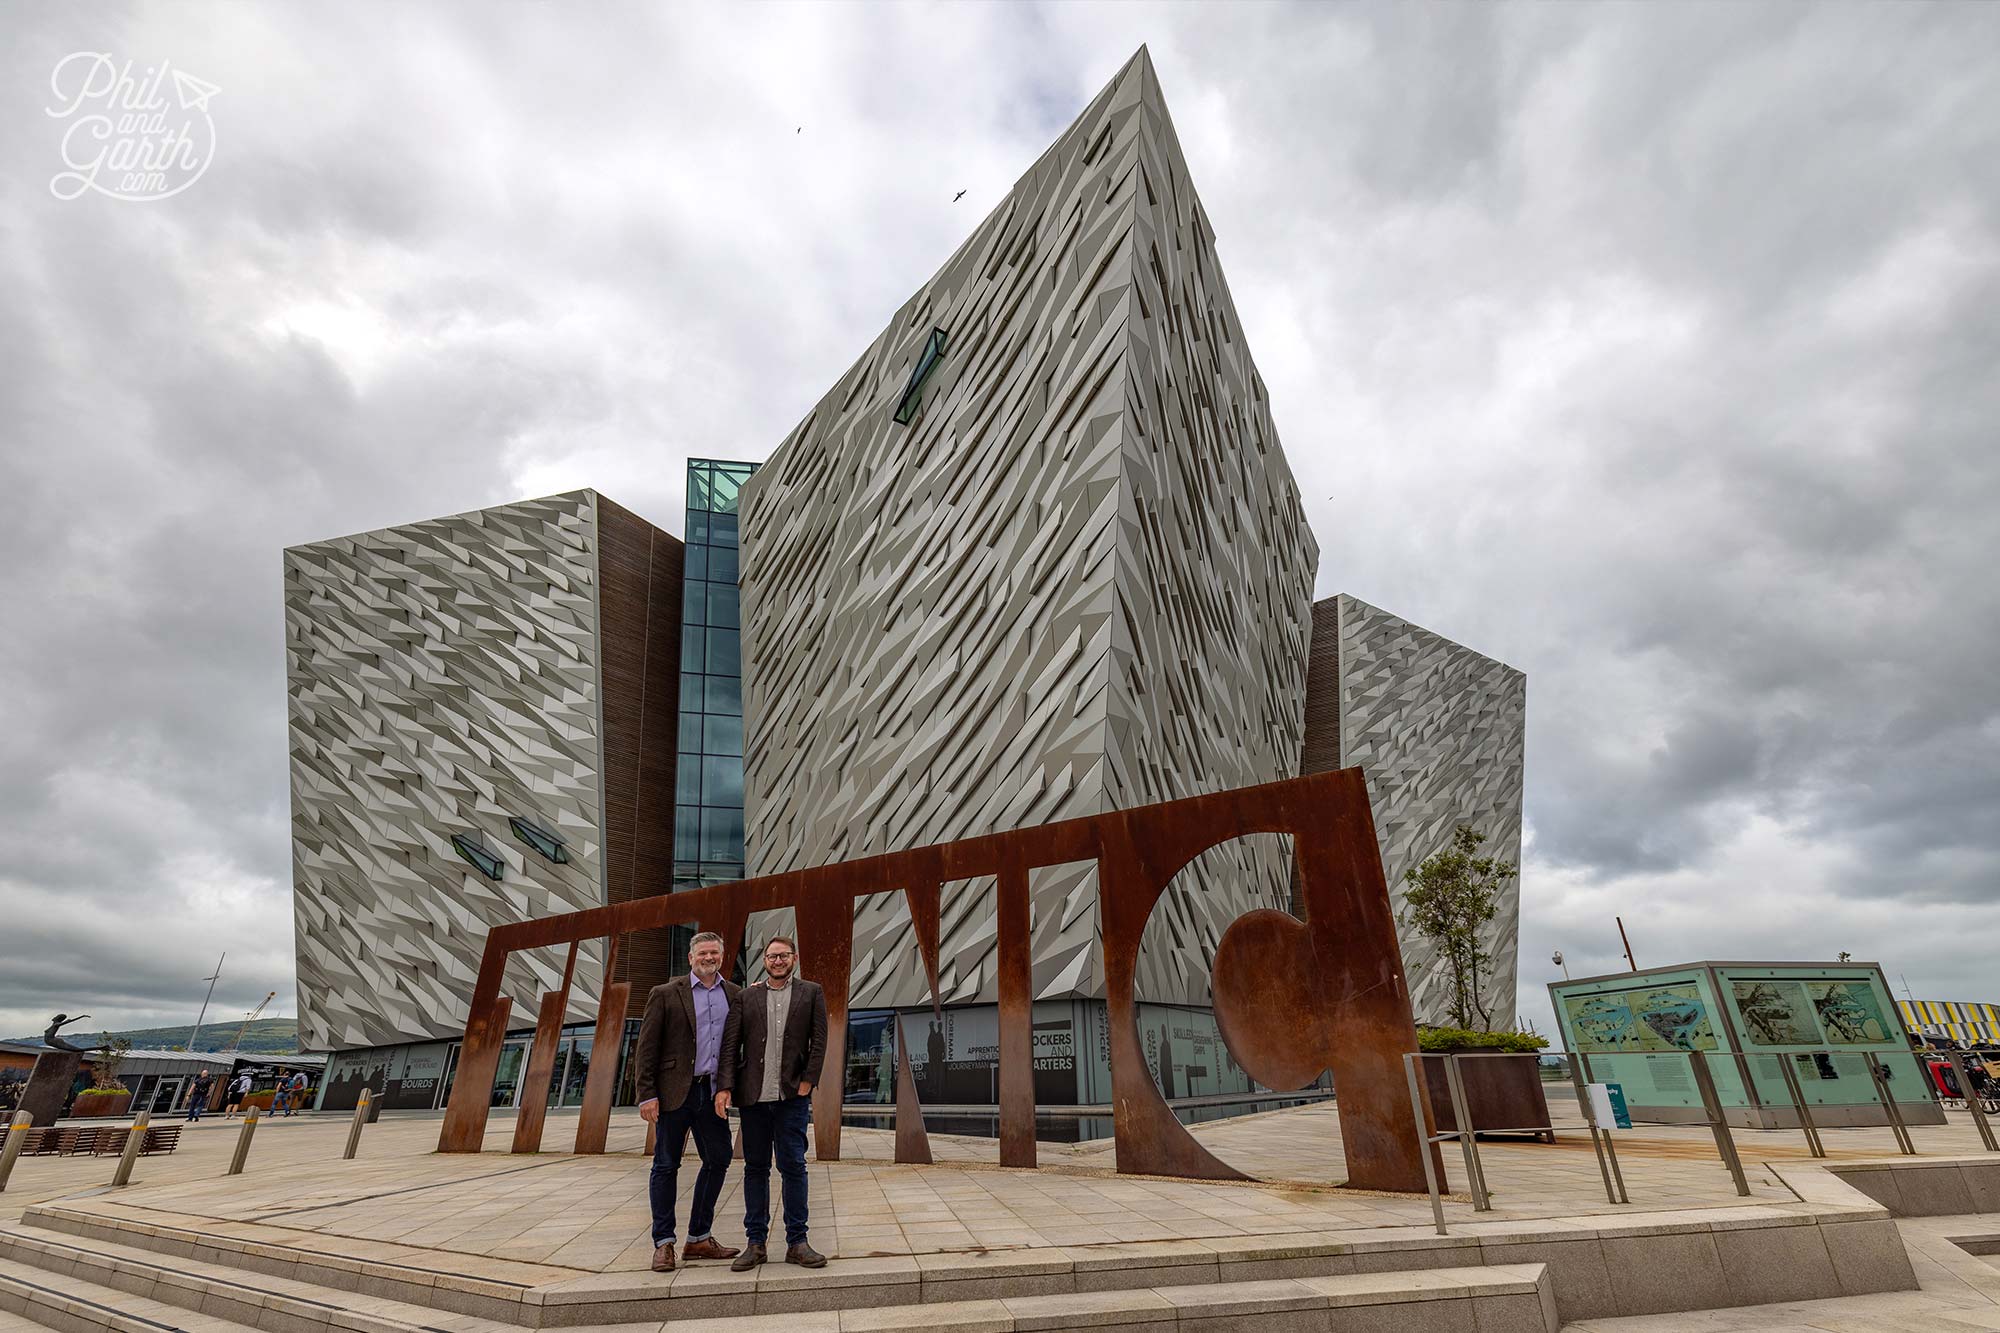 Phil and Garth outside the Titanic Belfast Museum